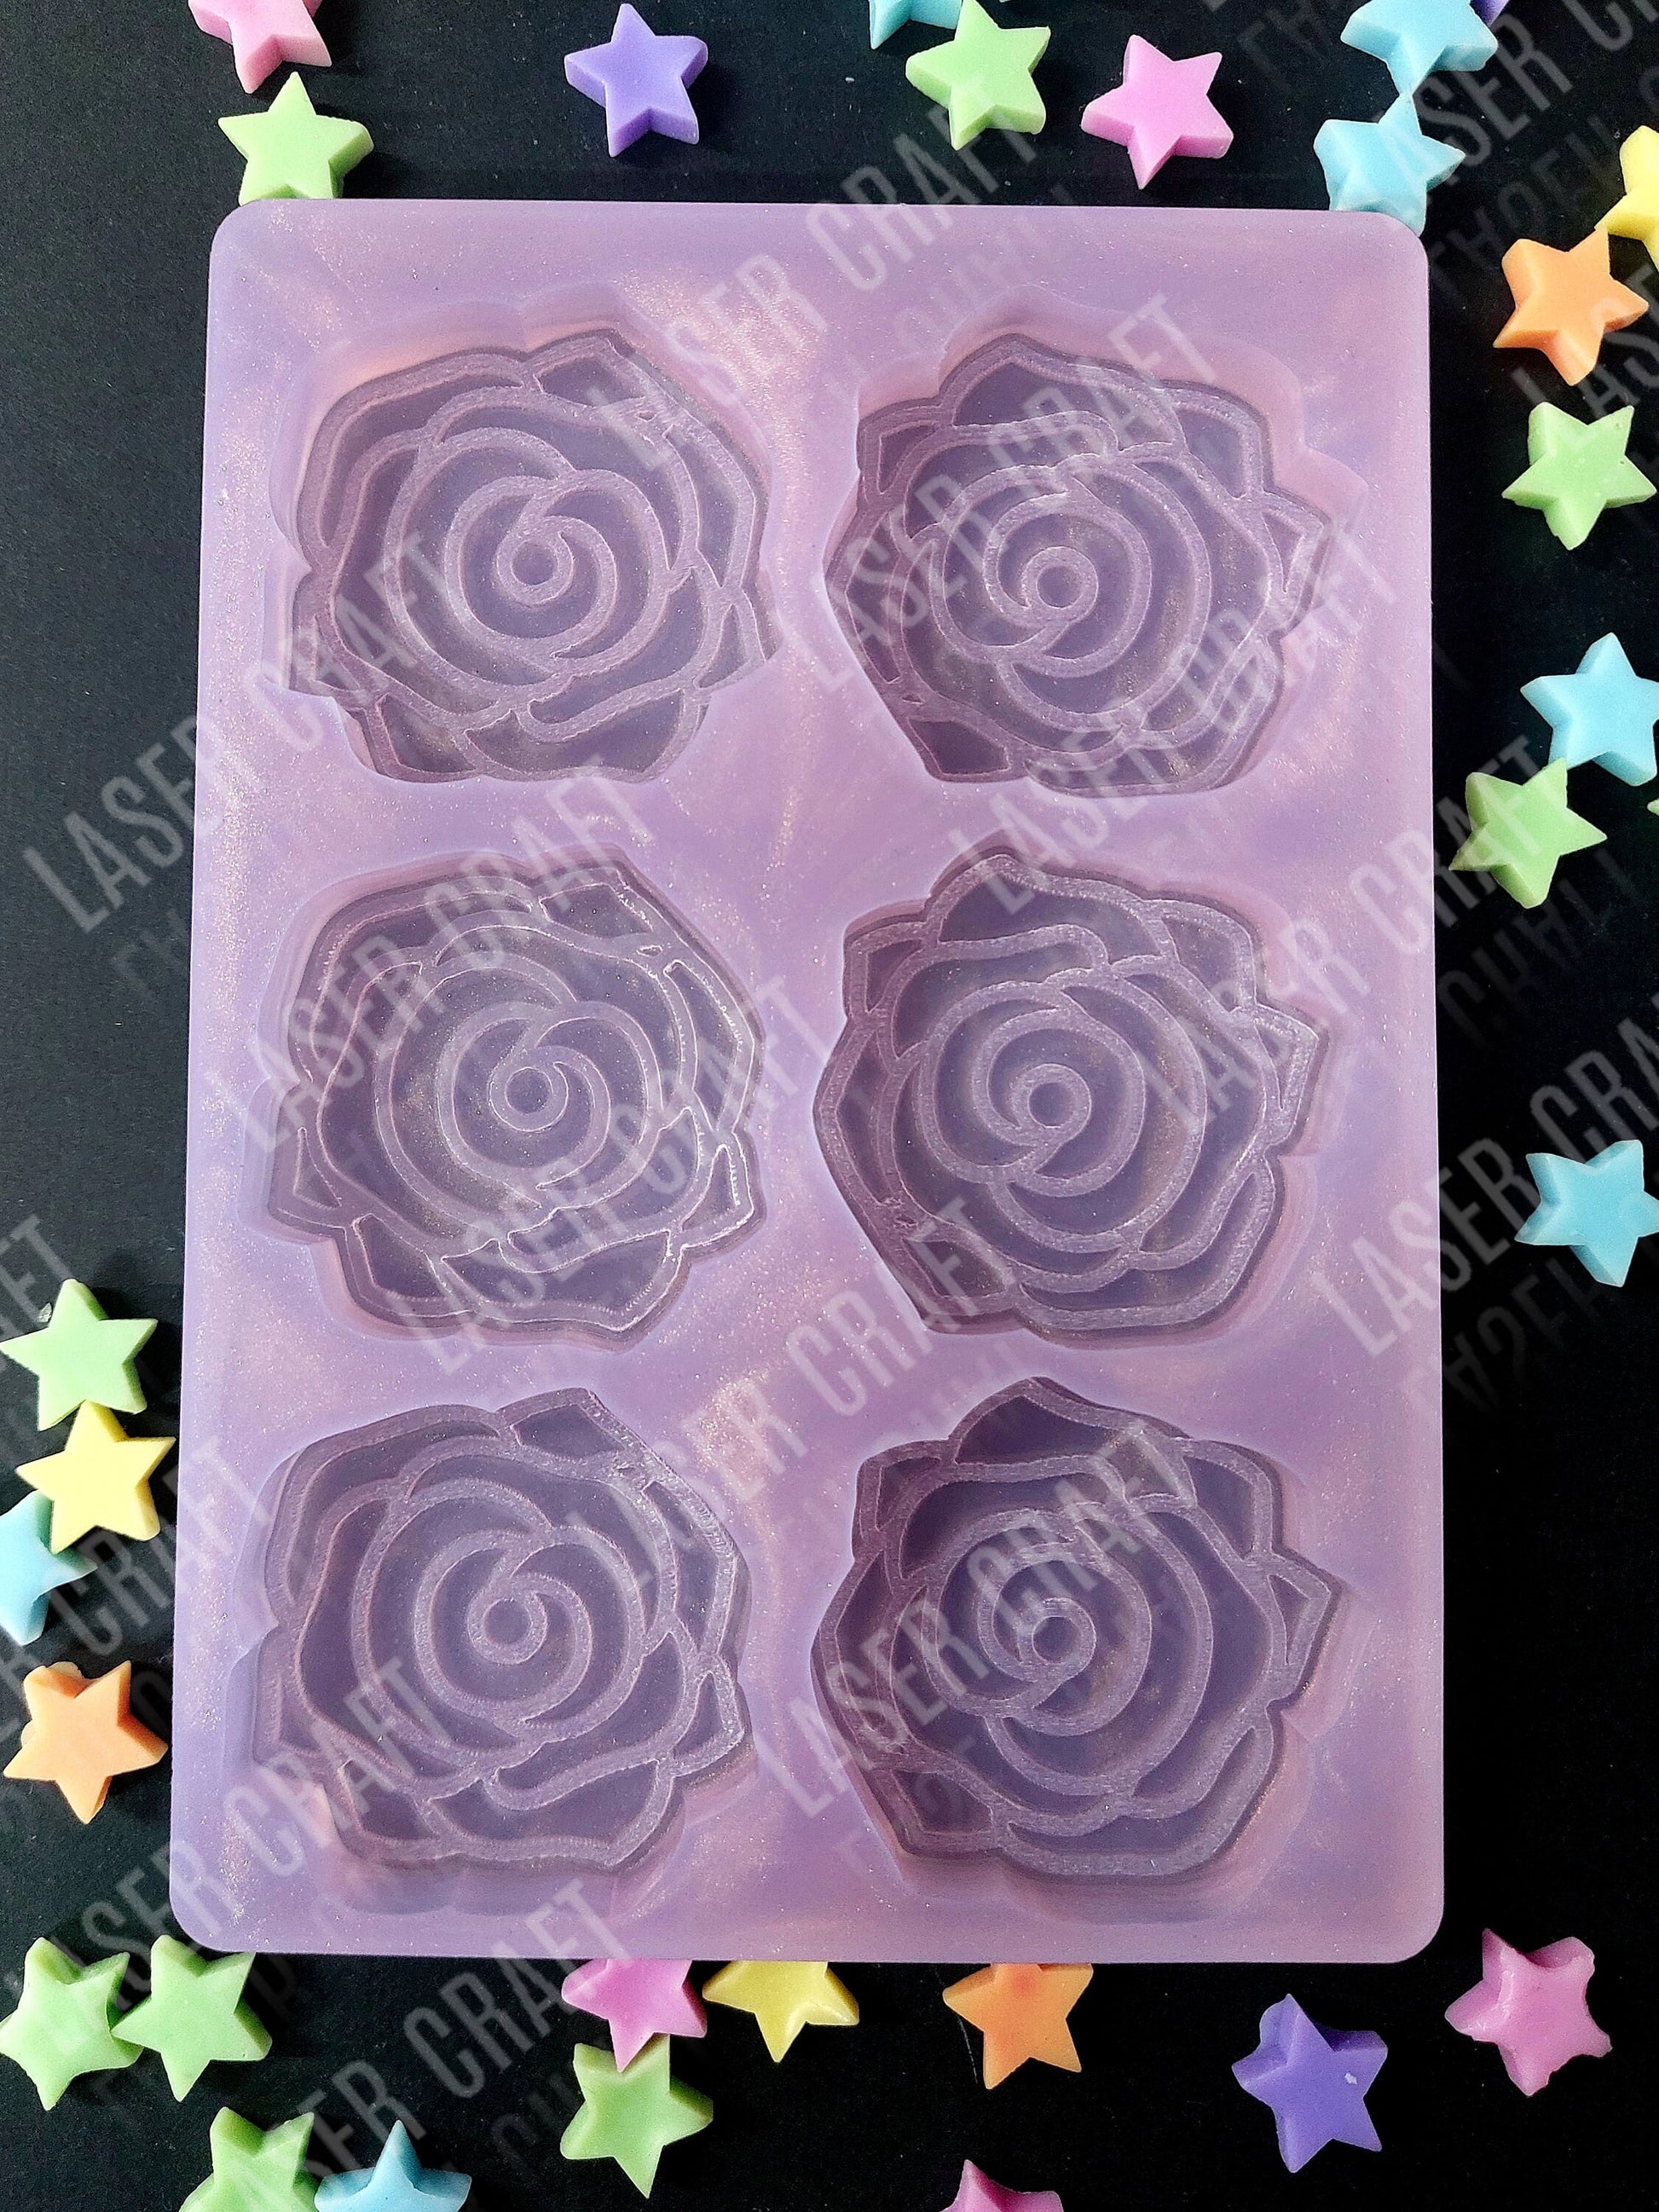 Flower 6 Cell Silicone Mould for wax, resin, soap